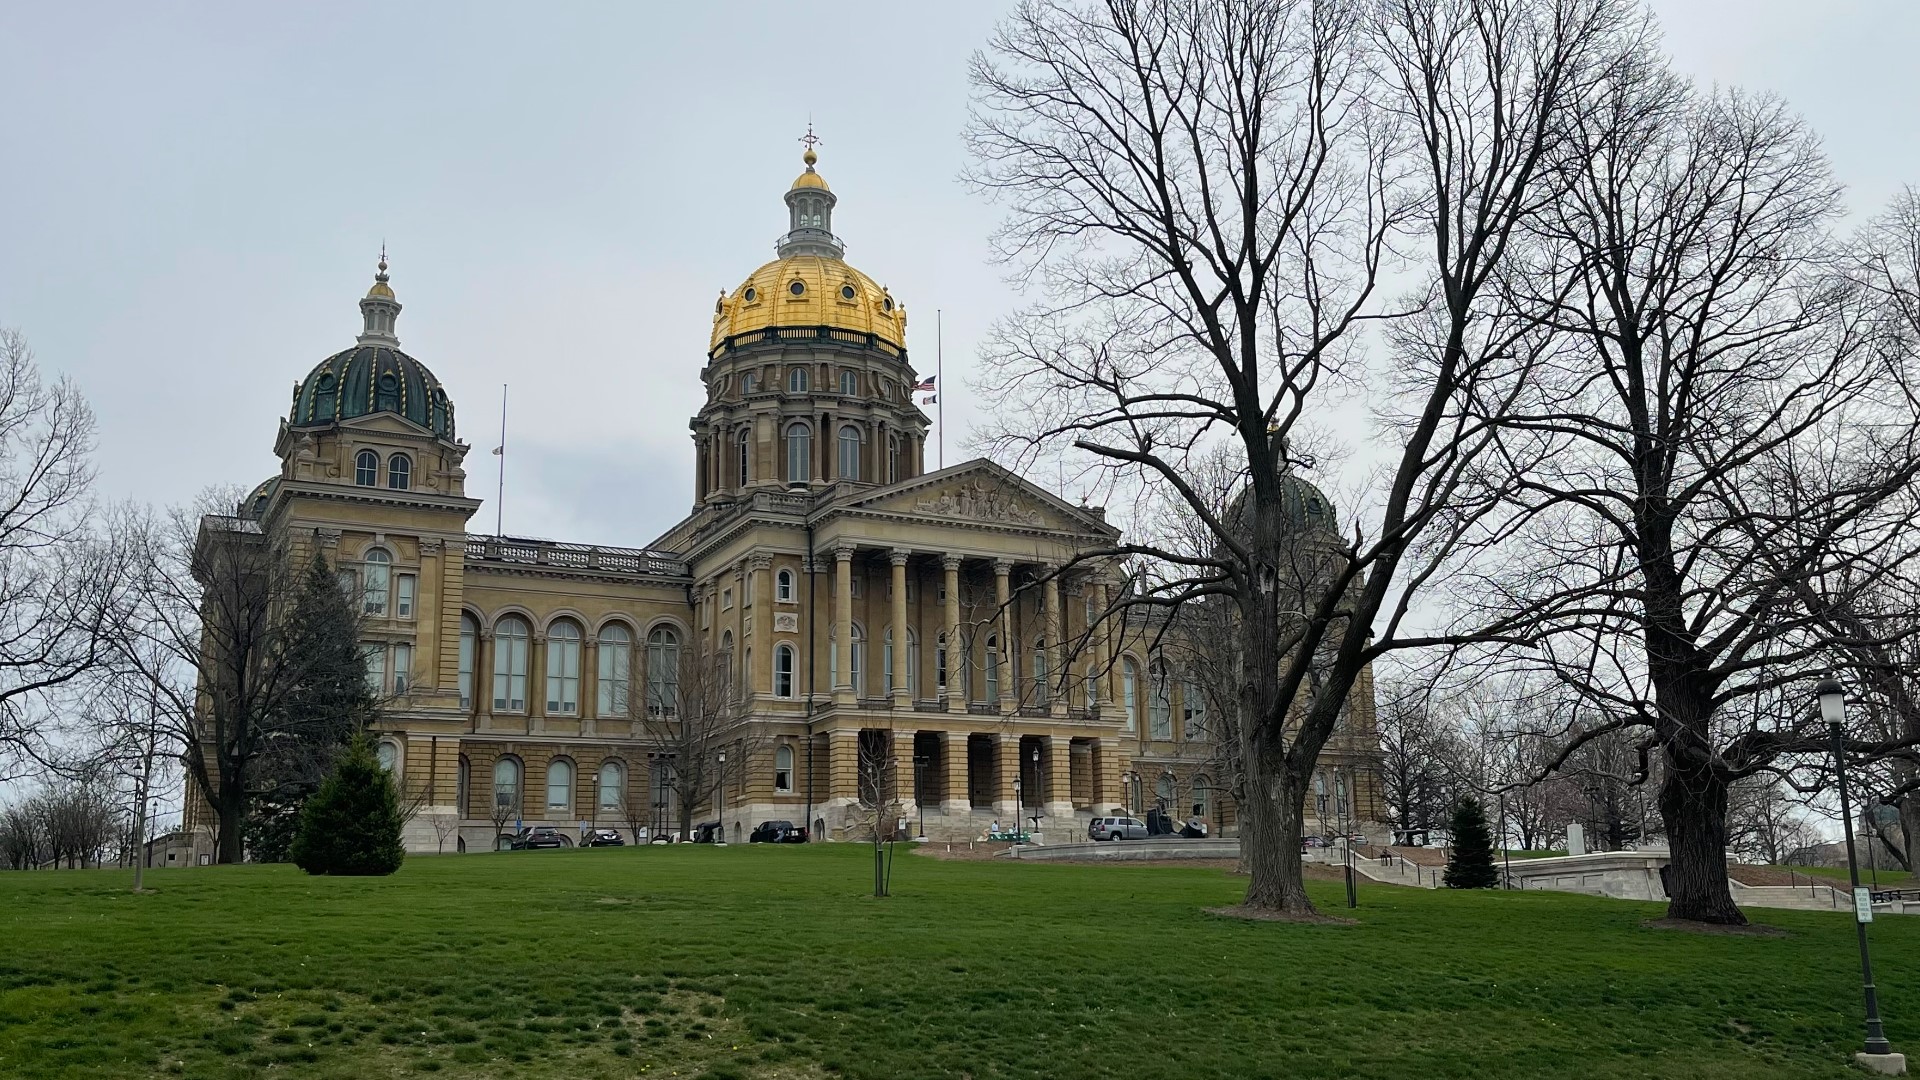 The 110th calendar day of session is April 30, and that's when per diems for lawmakers run out. But if they cannot agree, it could make for a longer session.